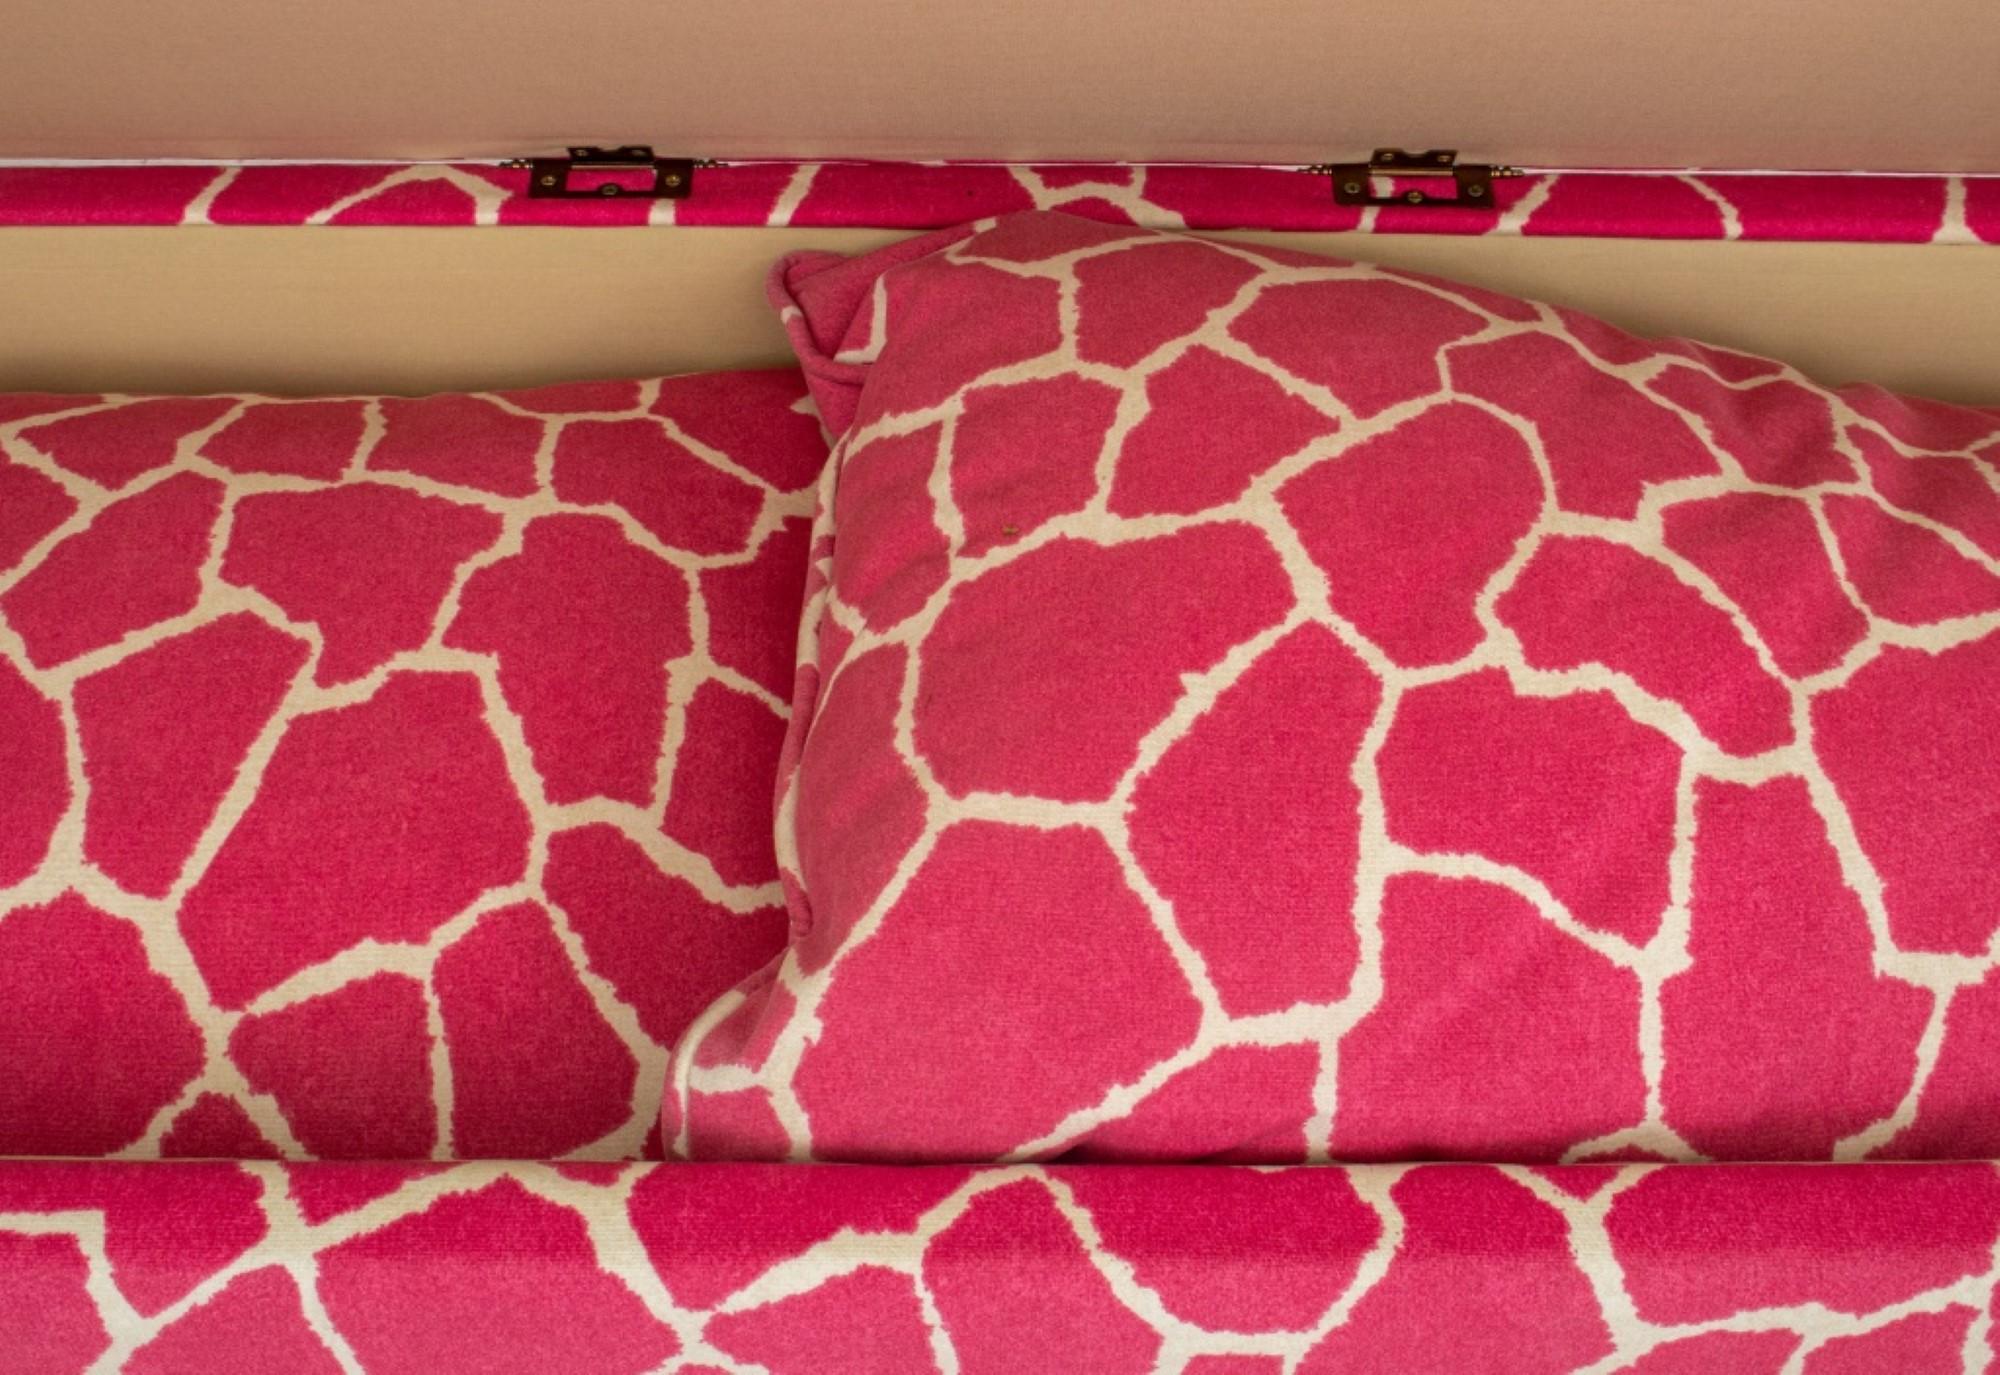 The dimensions for the modern contemporary ottoman bench upholstered in a pink and white giraffe print on canvas are as follows:

Height: 19.5